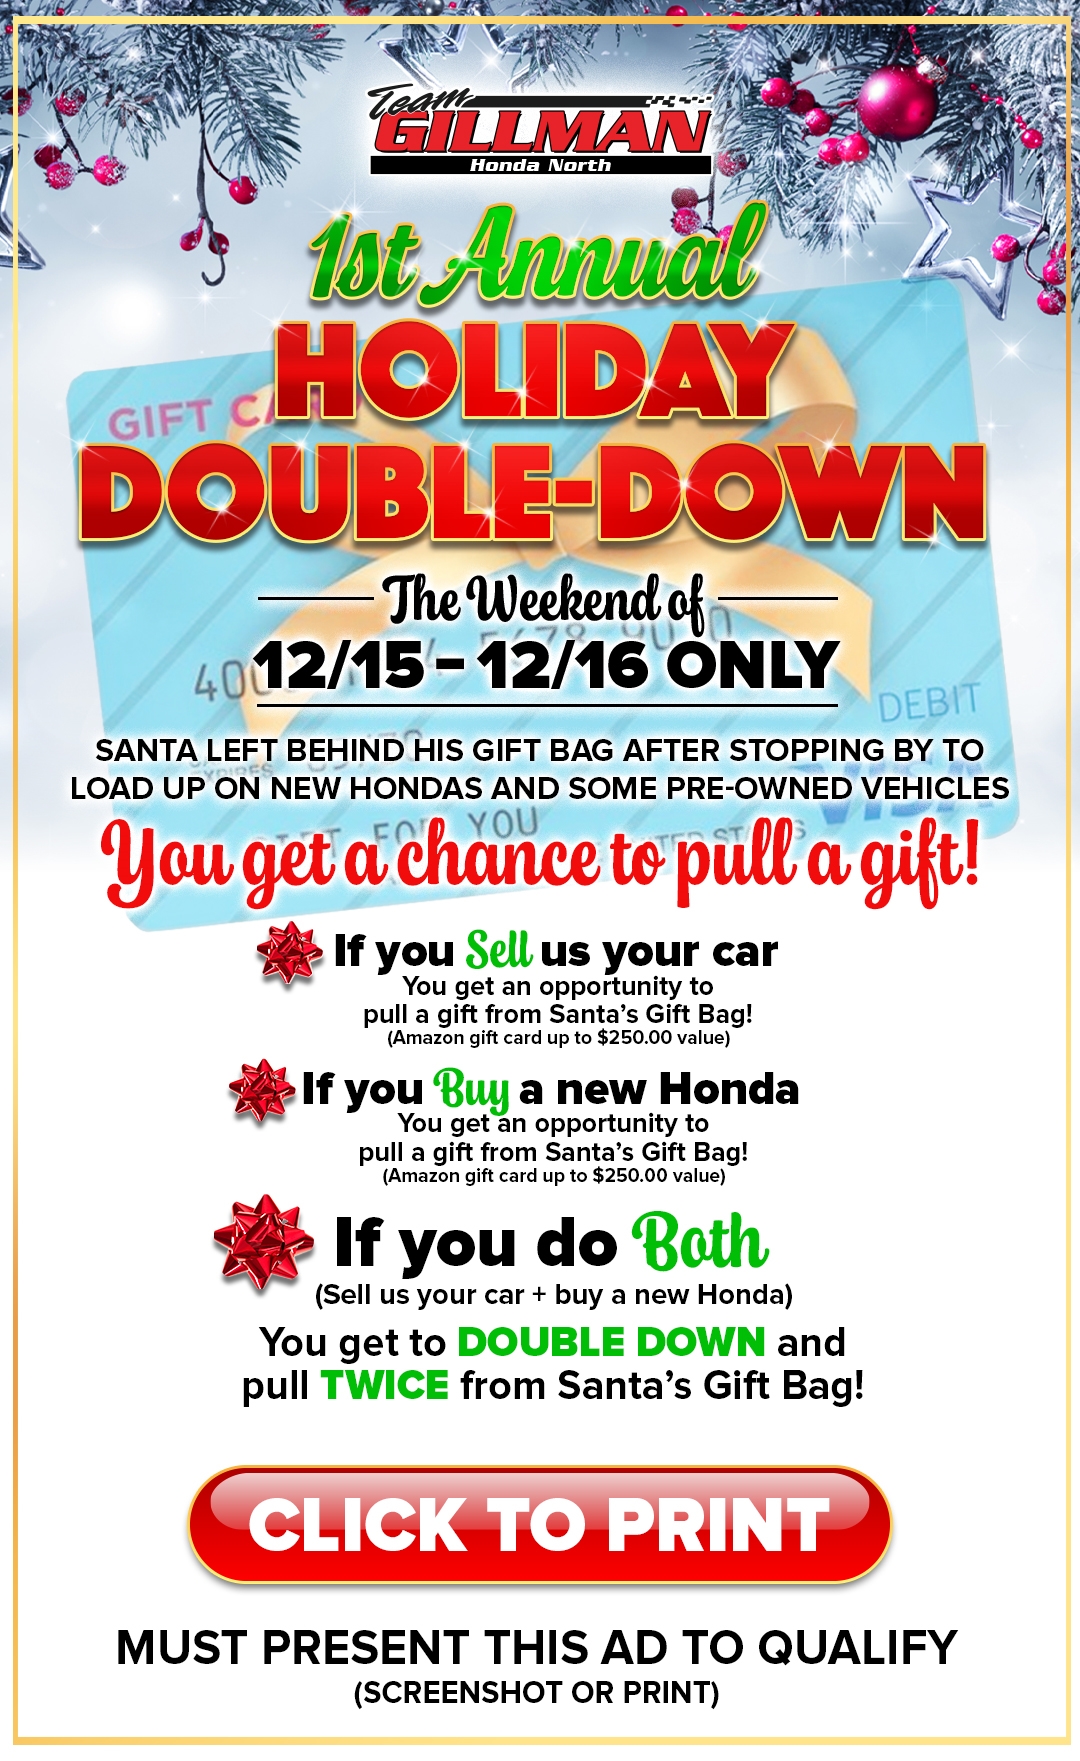 Make your holiday season brighter with Team Gillman Honda North's Holiday Double Down! Buy or sell your vehicle now for a chance to pull a gift from Santa's sack. Visit us today!